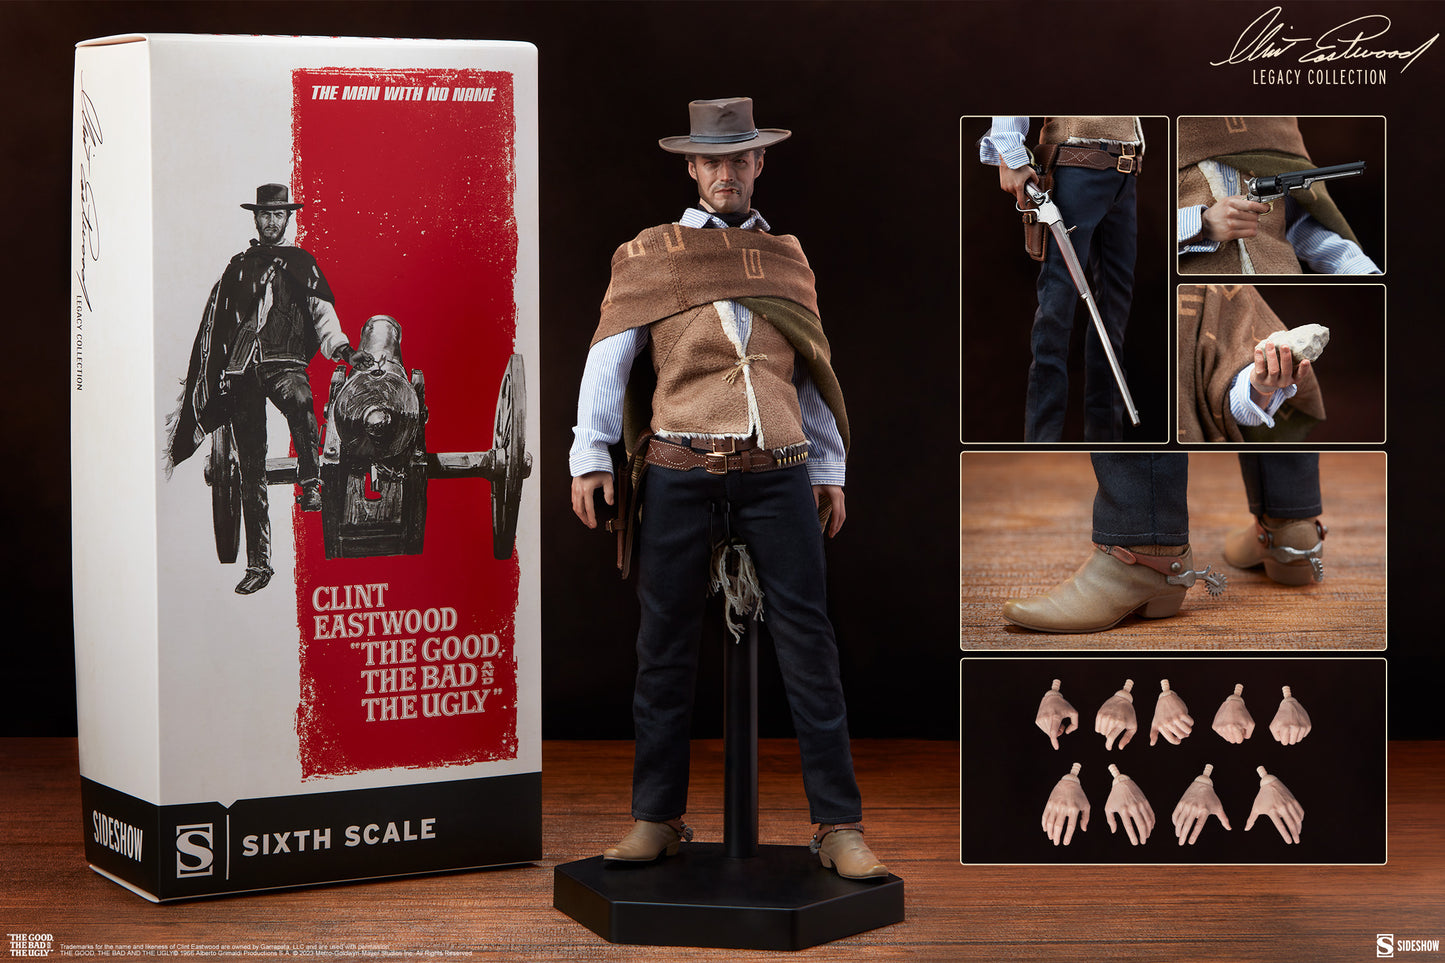 The Man With No Name Sixth Scale Figure